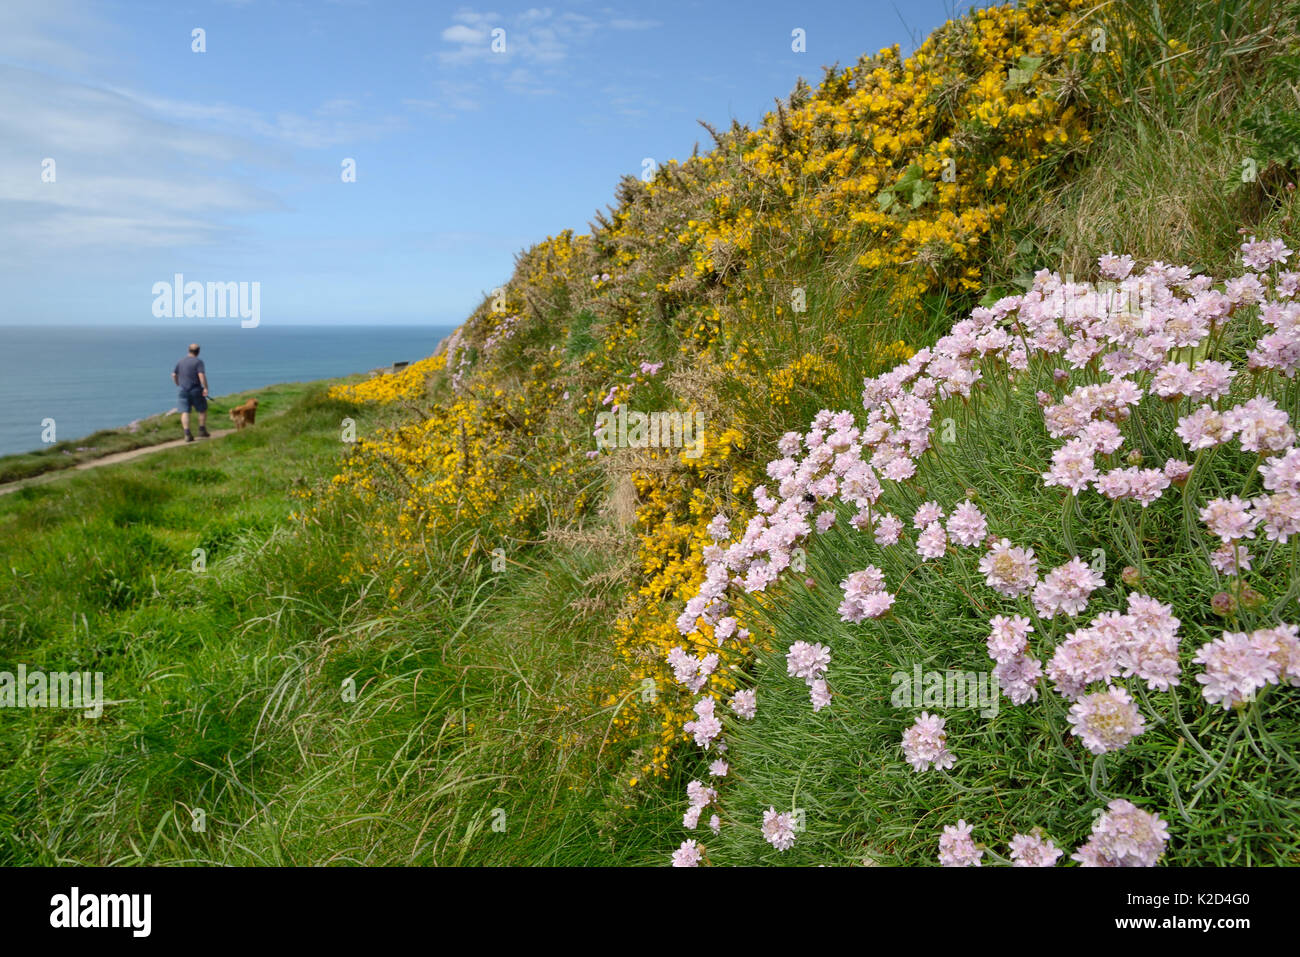 Sea thrift (Armeria maritima) and Common gorse bushes (Ulex europaeus) flowering on an old wall beside a clifftop path with a man walking a dog, Widemouth Bay, Cornwall, UK, May. Stock Photo